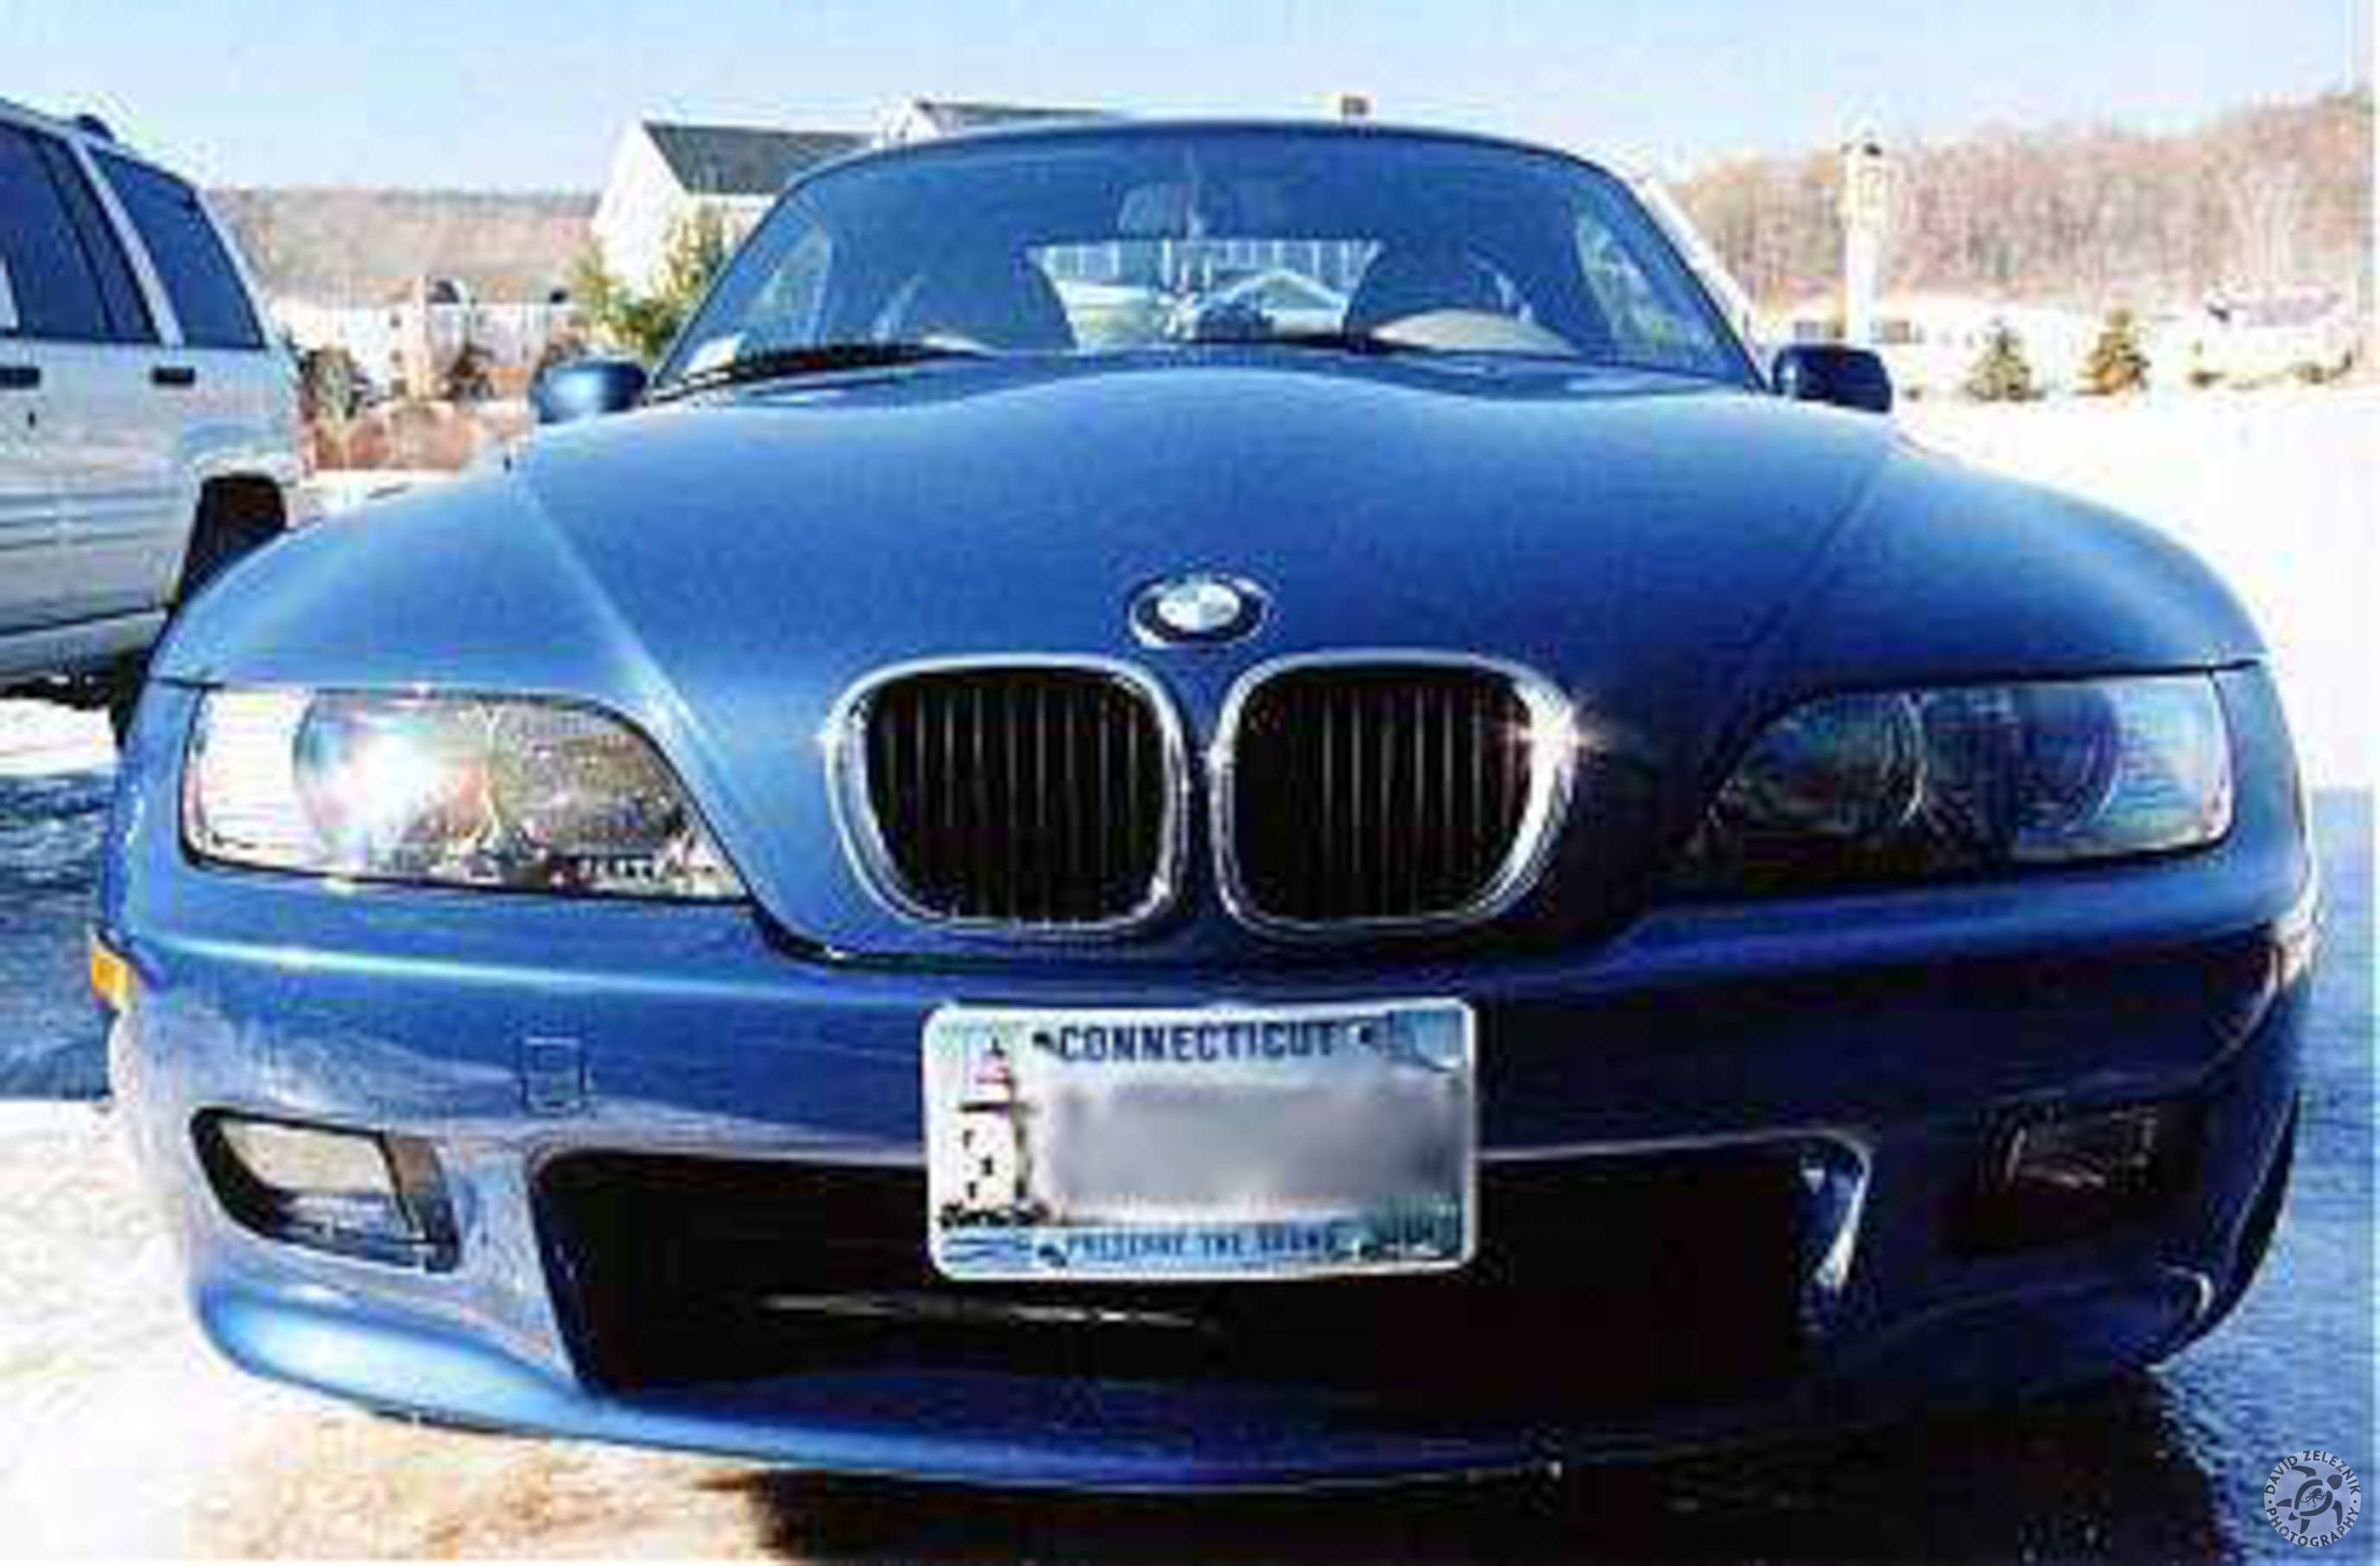 z3_1999winter Here is my Z3 during December 1999, shortly after I took delivery. It's hard to tell from this picture, but the hardtop came installed from the factory. Before driving the car off the lot, I had the dealer install a set of Pirelli Winter 210 Asimmetrico snow tires that I purchased from TireRack mounted on 15" steel rims. Oh, and by the way, that is the same driveway as the next picture. Our driveway faces north and becomes a skating rink during the winter.